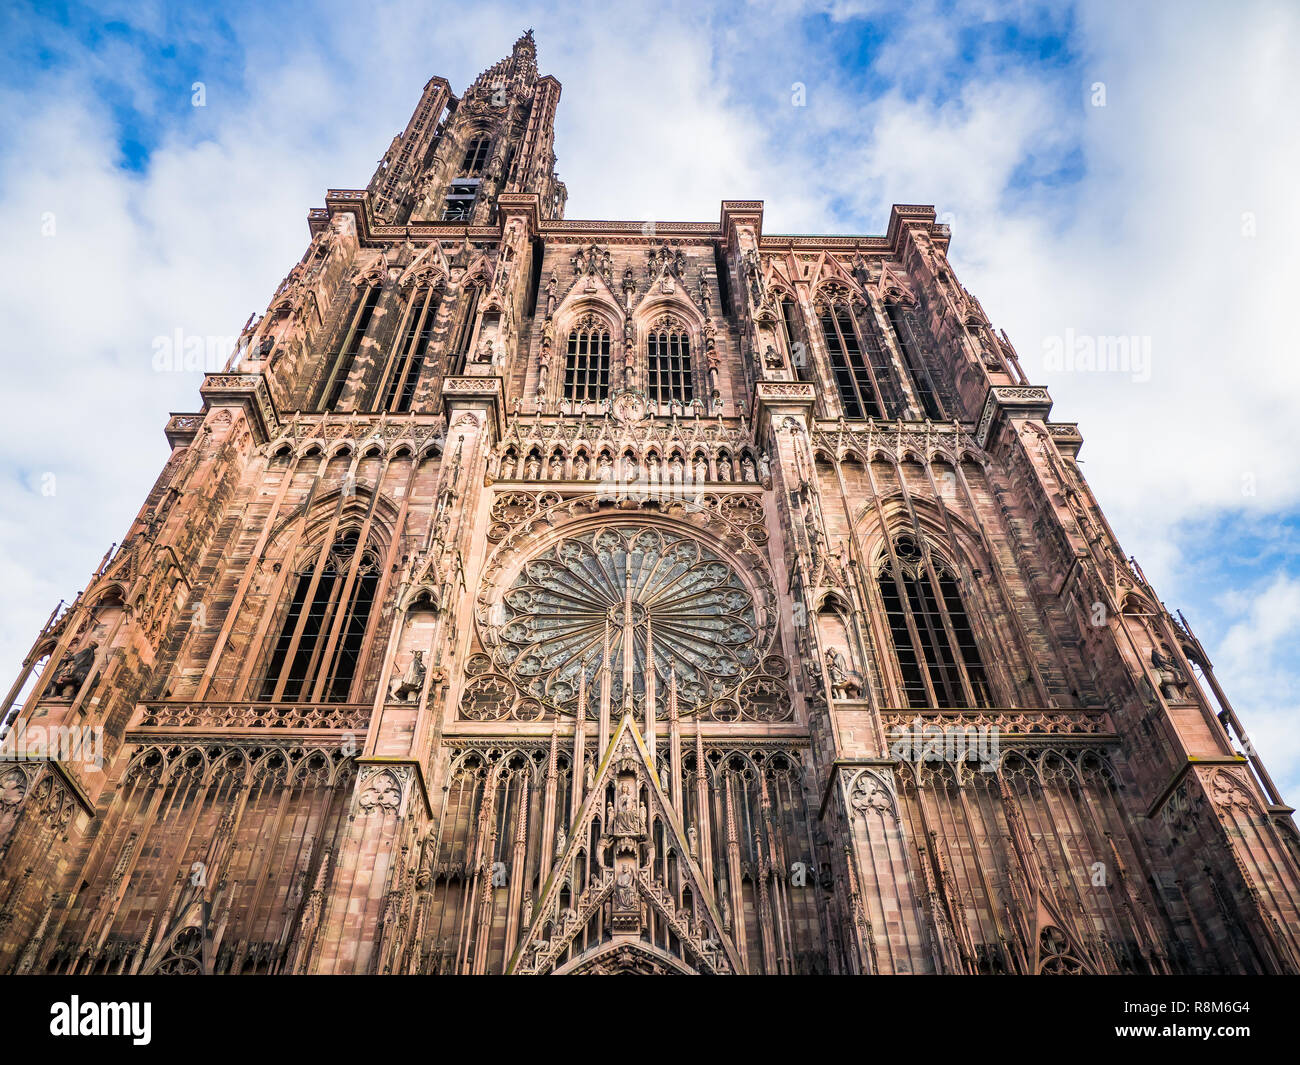 Elegant exterior architecture of front facade of Notre dame cathedral in Strasbourg, France Stock Photo